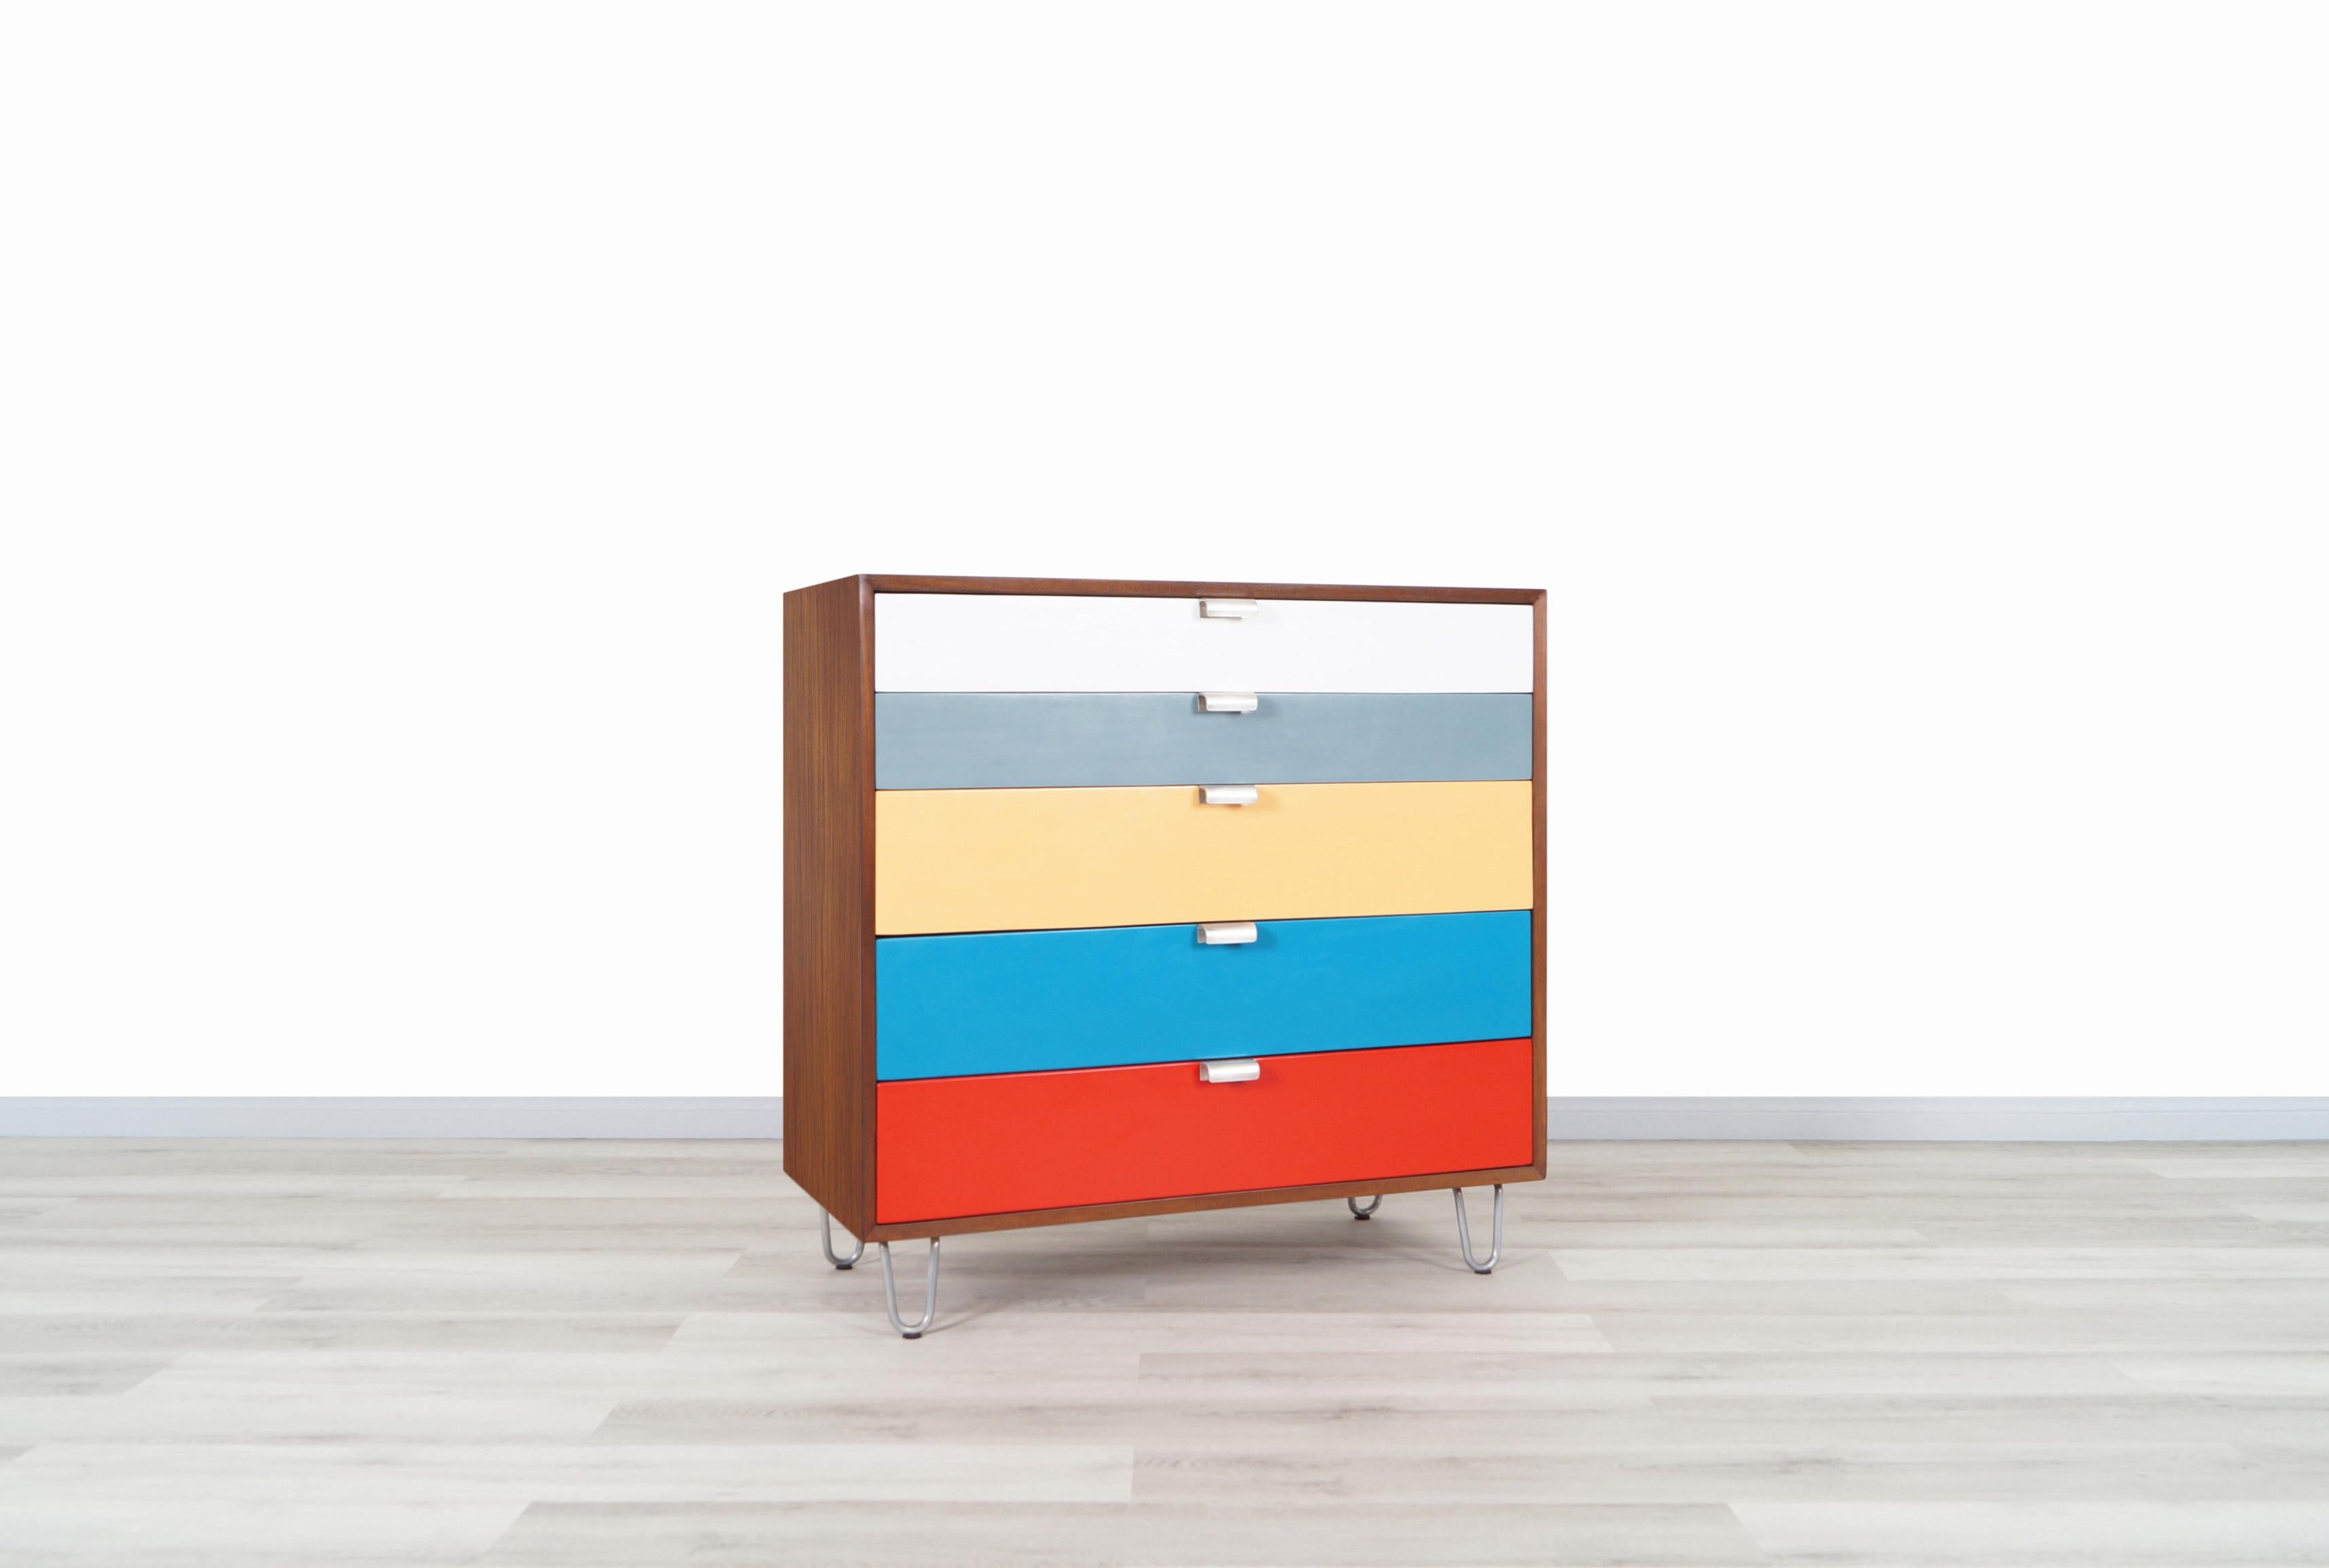 A rare vintage chest of drawers designed by iconic designer George Nelson for Herman Miller, circa 1940s. Features five multi-color dovetailed drawers, all integrated with signature sculptural steel handles. The walnut case sits on top of four